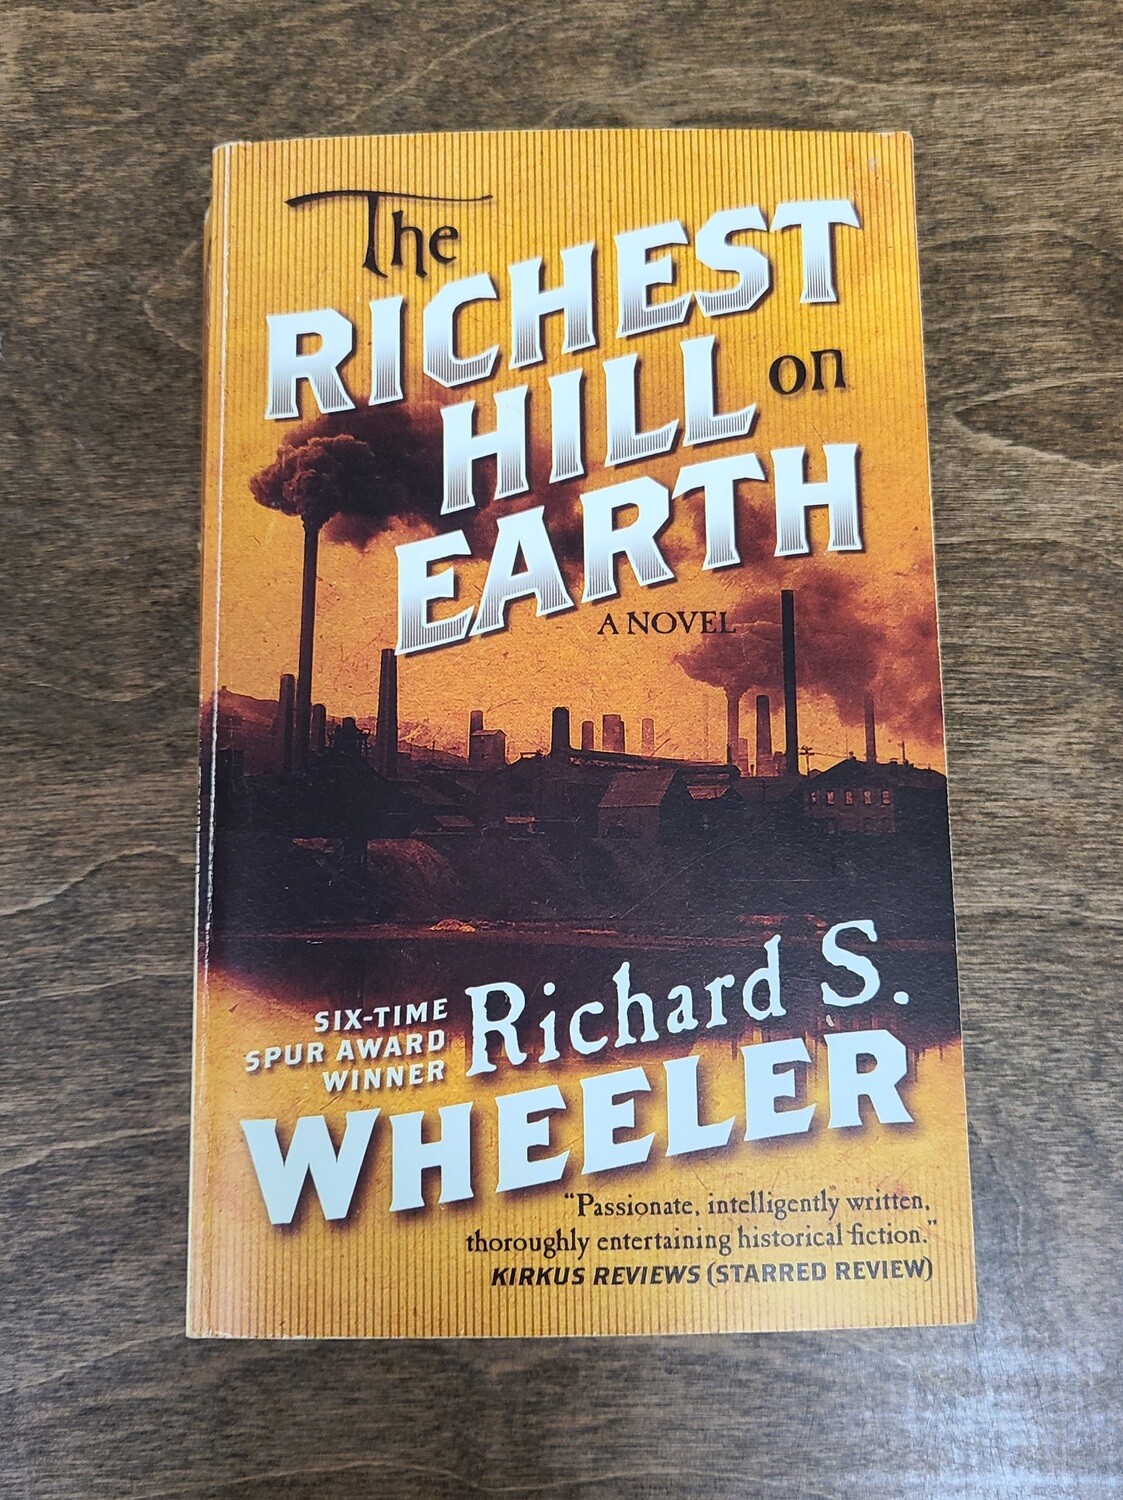 The Richest Hill on Earth by Richard S. Wheeler